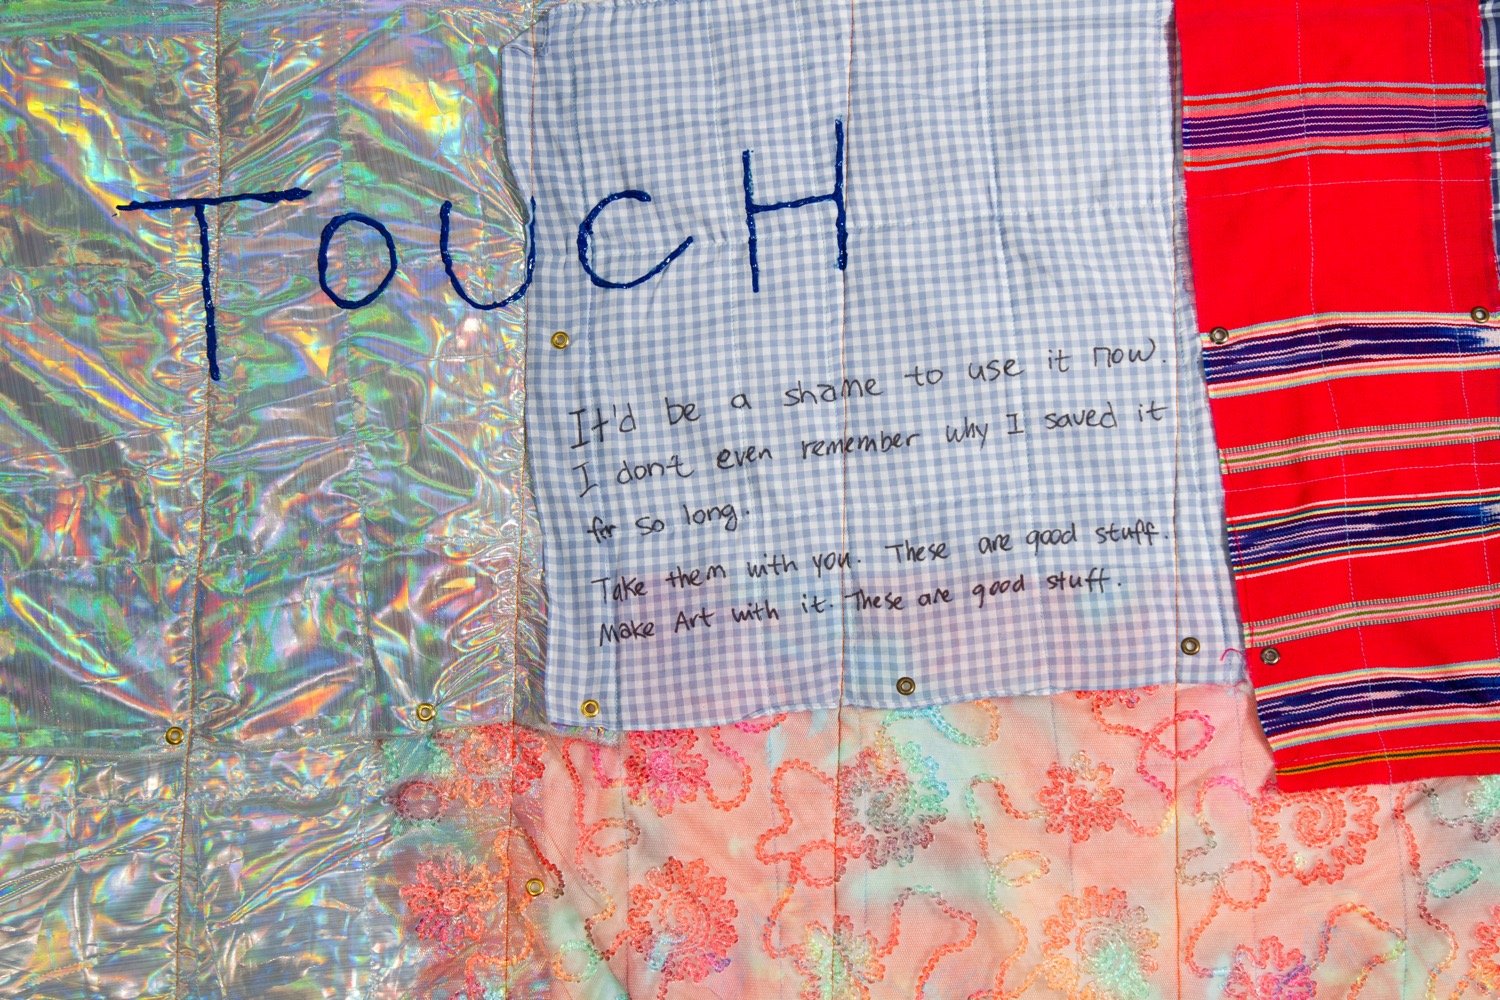   YIELD  (detail), Fabric, wash cloth, pigment, beads, puff paint; 2019, 66x77in 